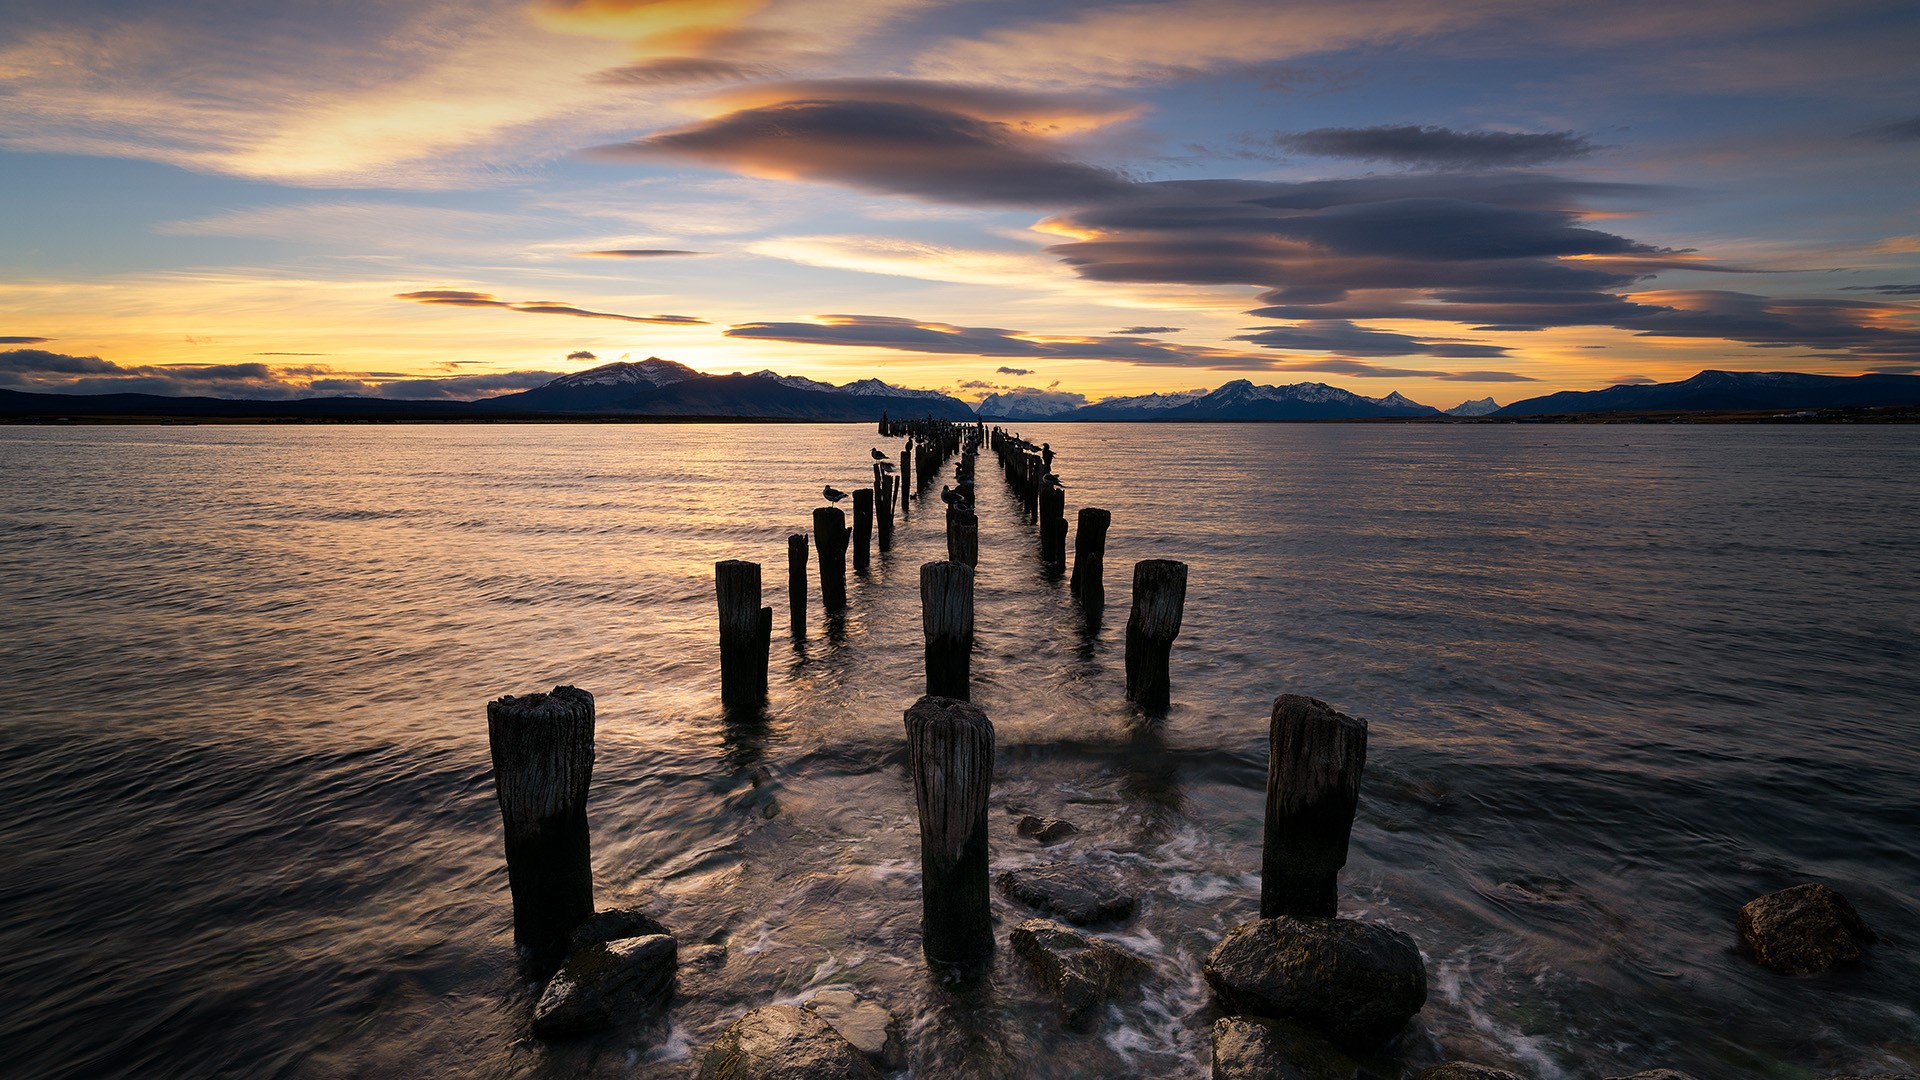 General 1920x1080 clouds sky mountains wood sunset water waves water ripples Puerto Natales Pier pier Chile landscape South America